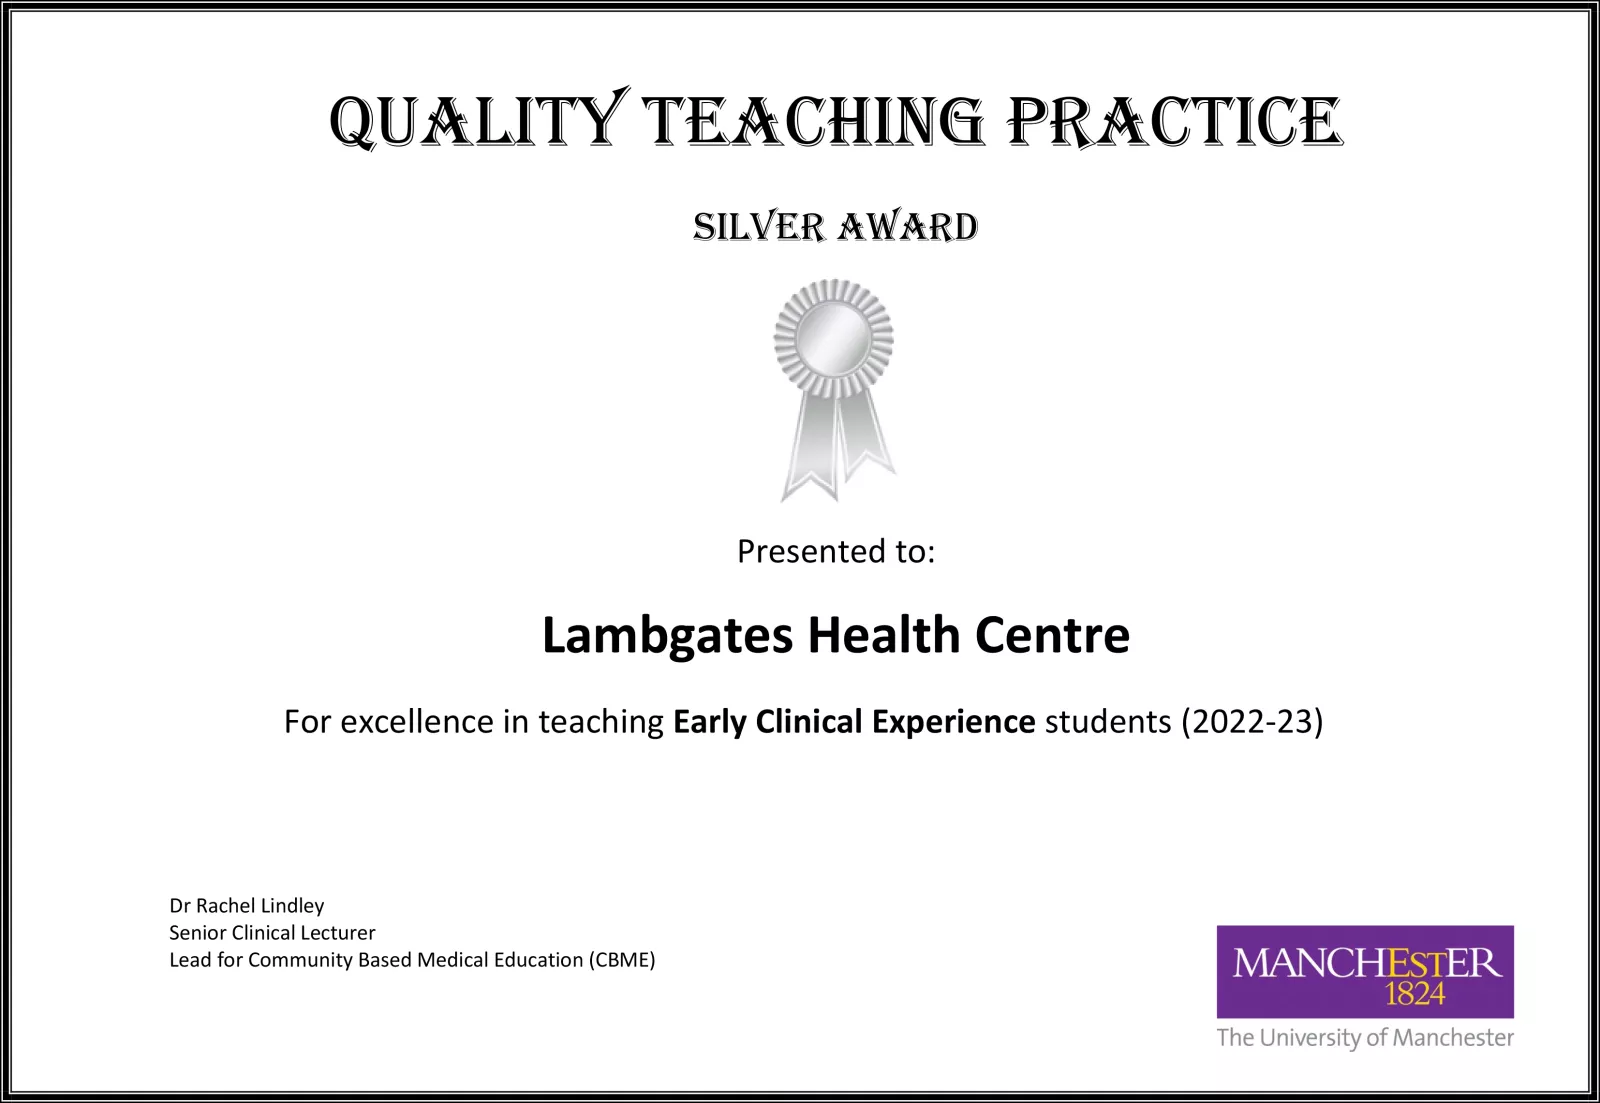 Image shows Quality Teaching Practice Silver Award Presented to: Lambgates Health Centre for excellence in teaching Early Clinical Experience students (2022-23)